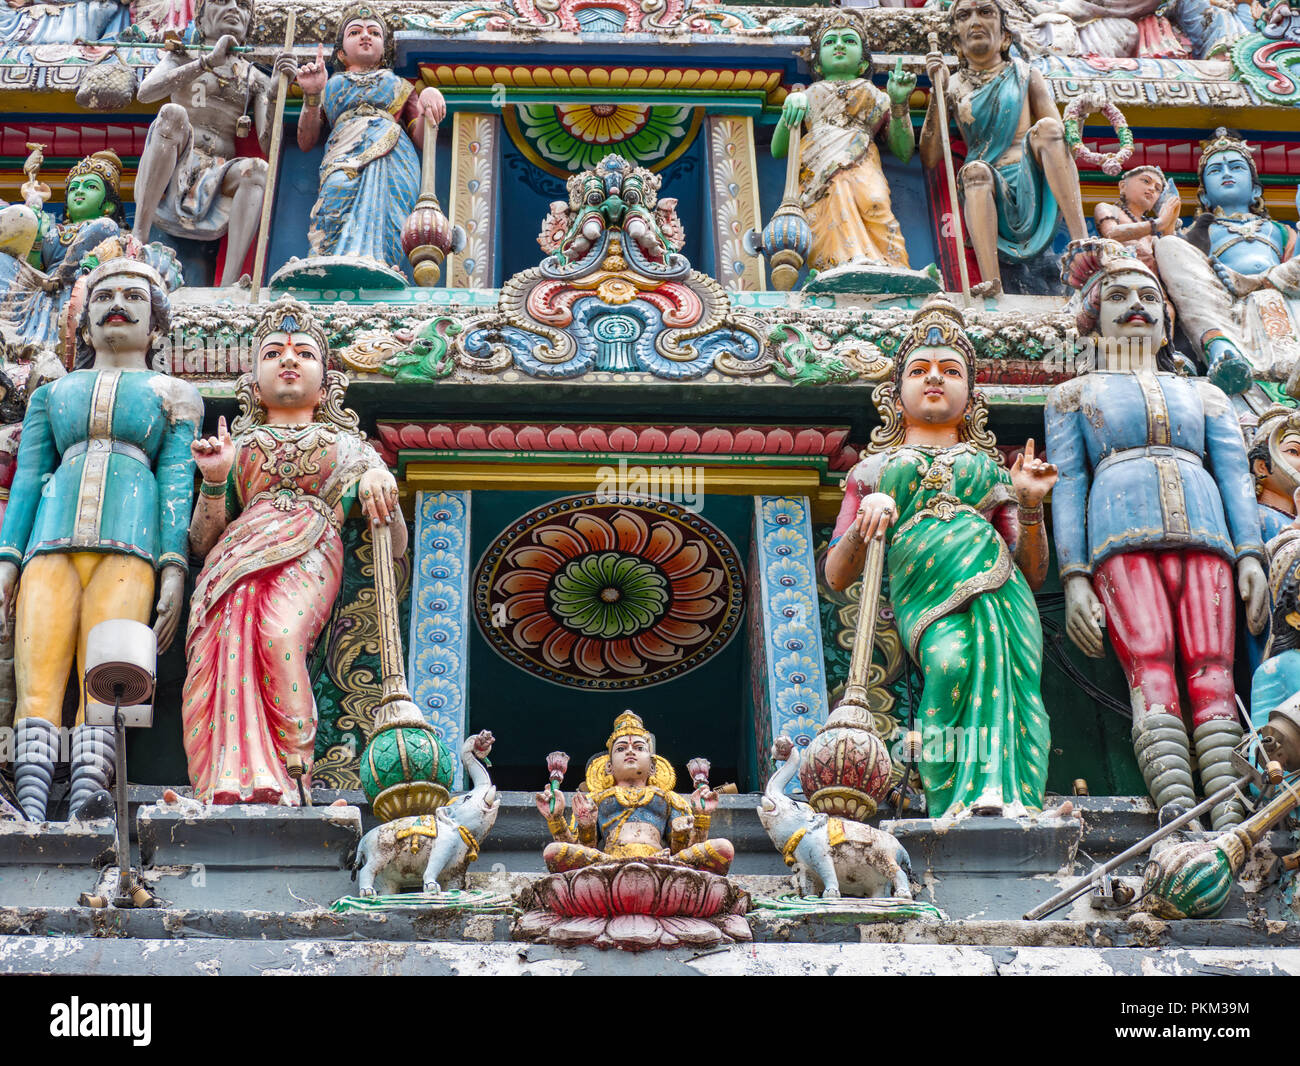 Sculpture, architecture and symbols of Hindu temple at Singapore , Sri Mariamman Temple, Singapore is a oldest Hindu temple. Stock Photo